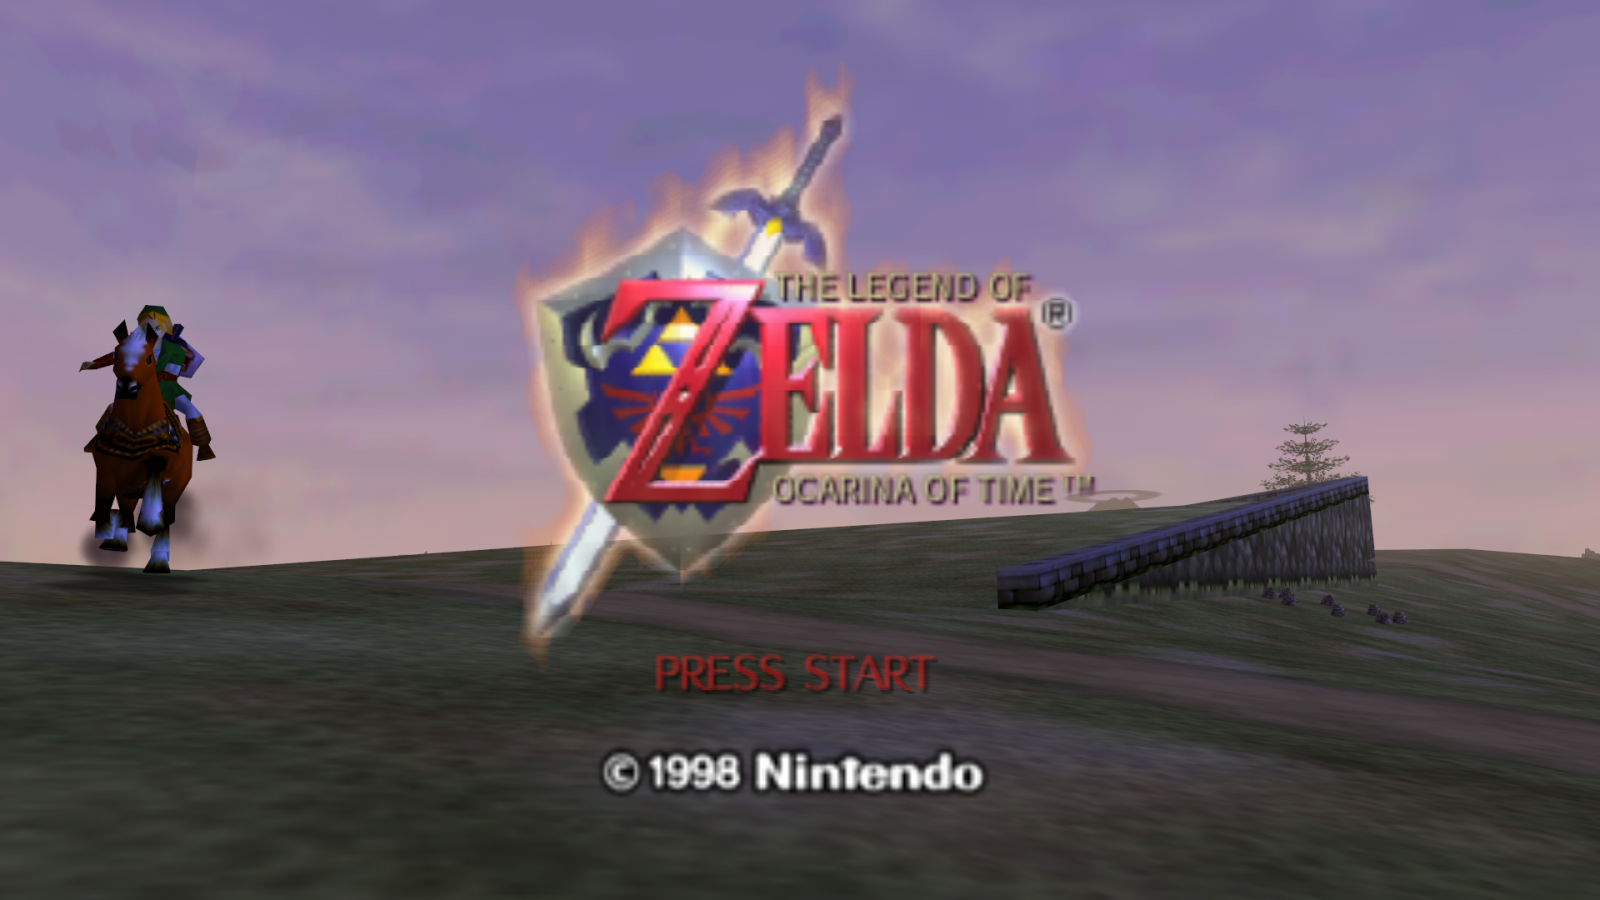 How to get Zelda: Ocarina of Time ONLINE in 2 minutes - Easy